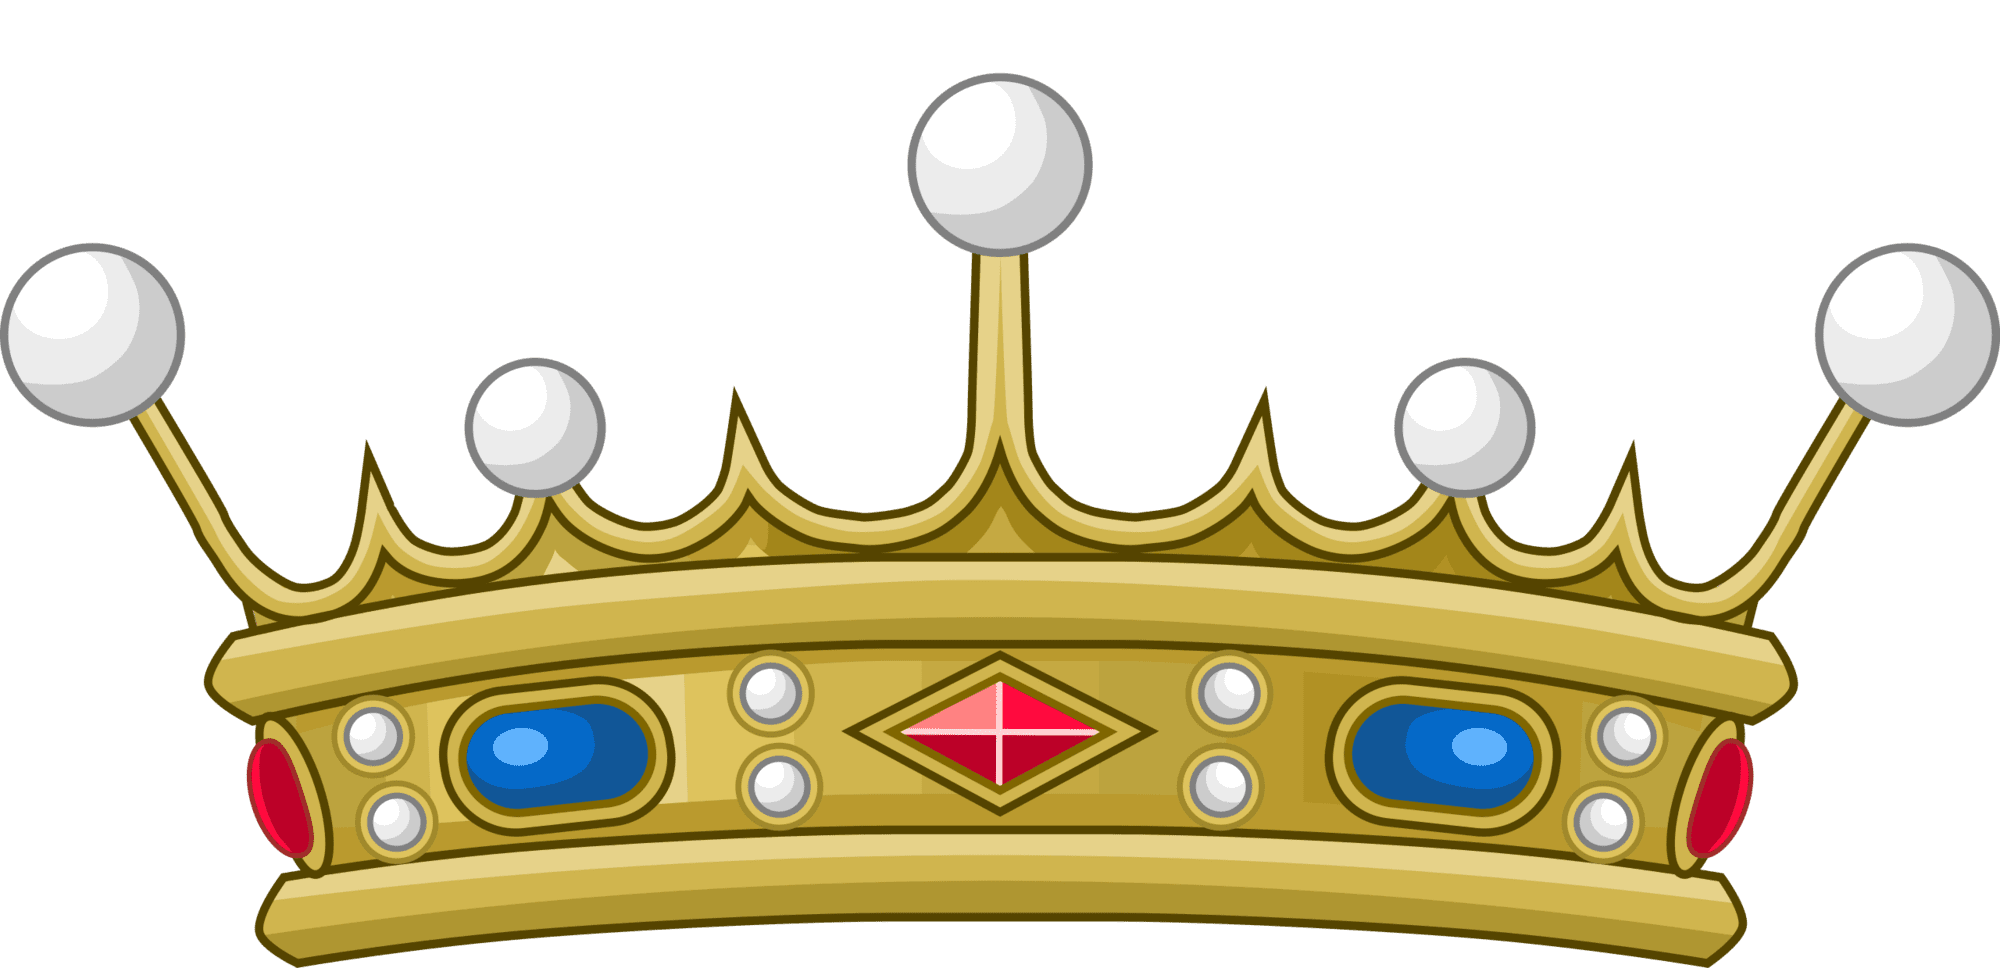 Queen crown of viscount france variant clipart photo